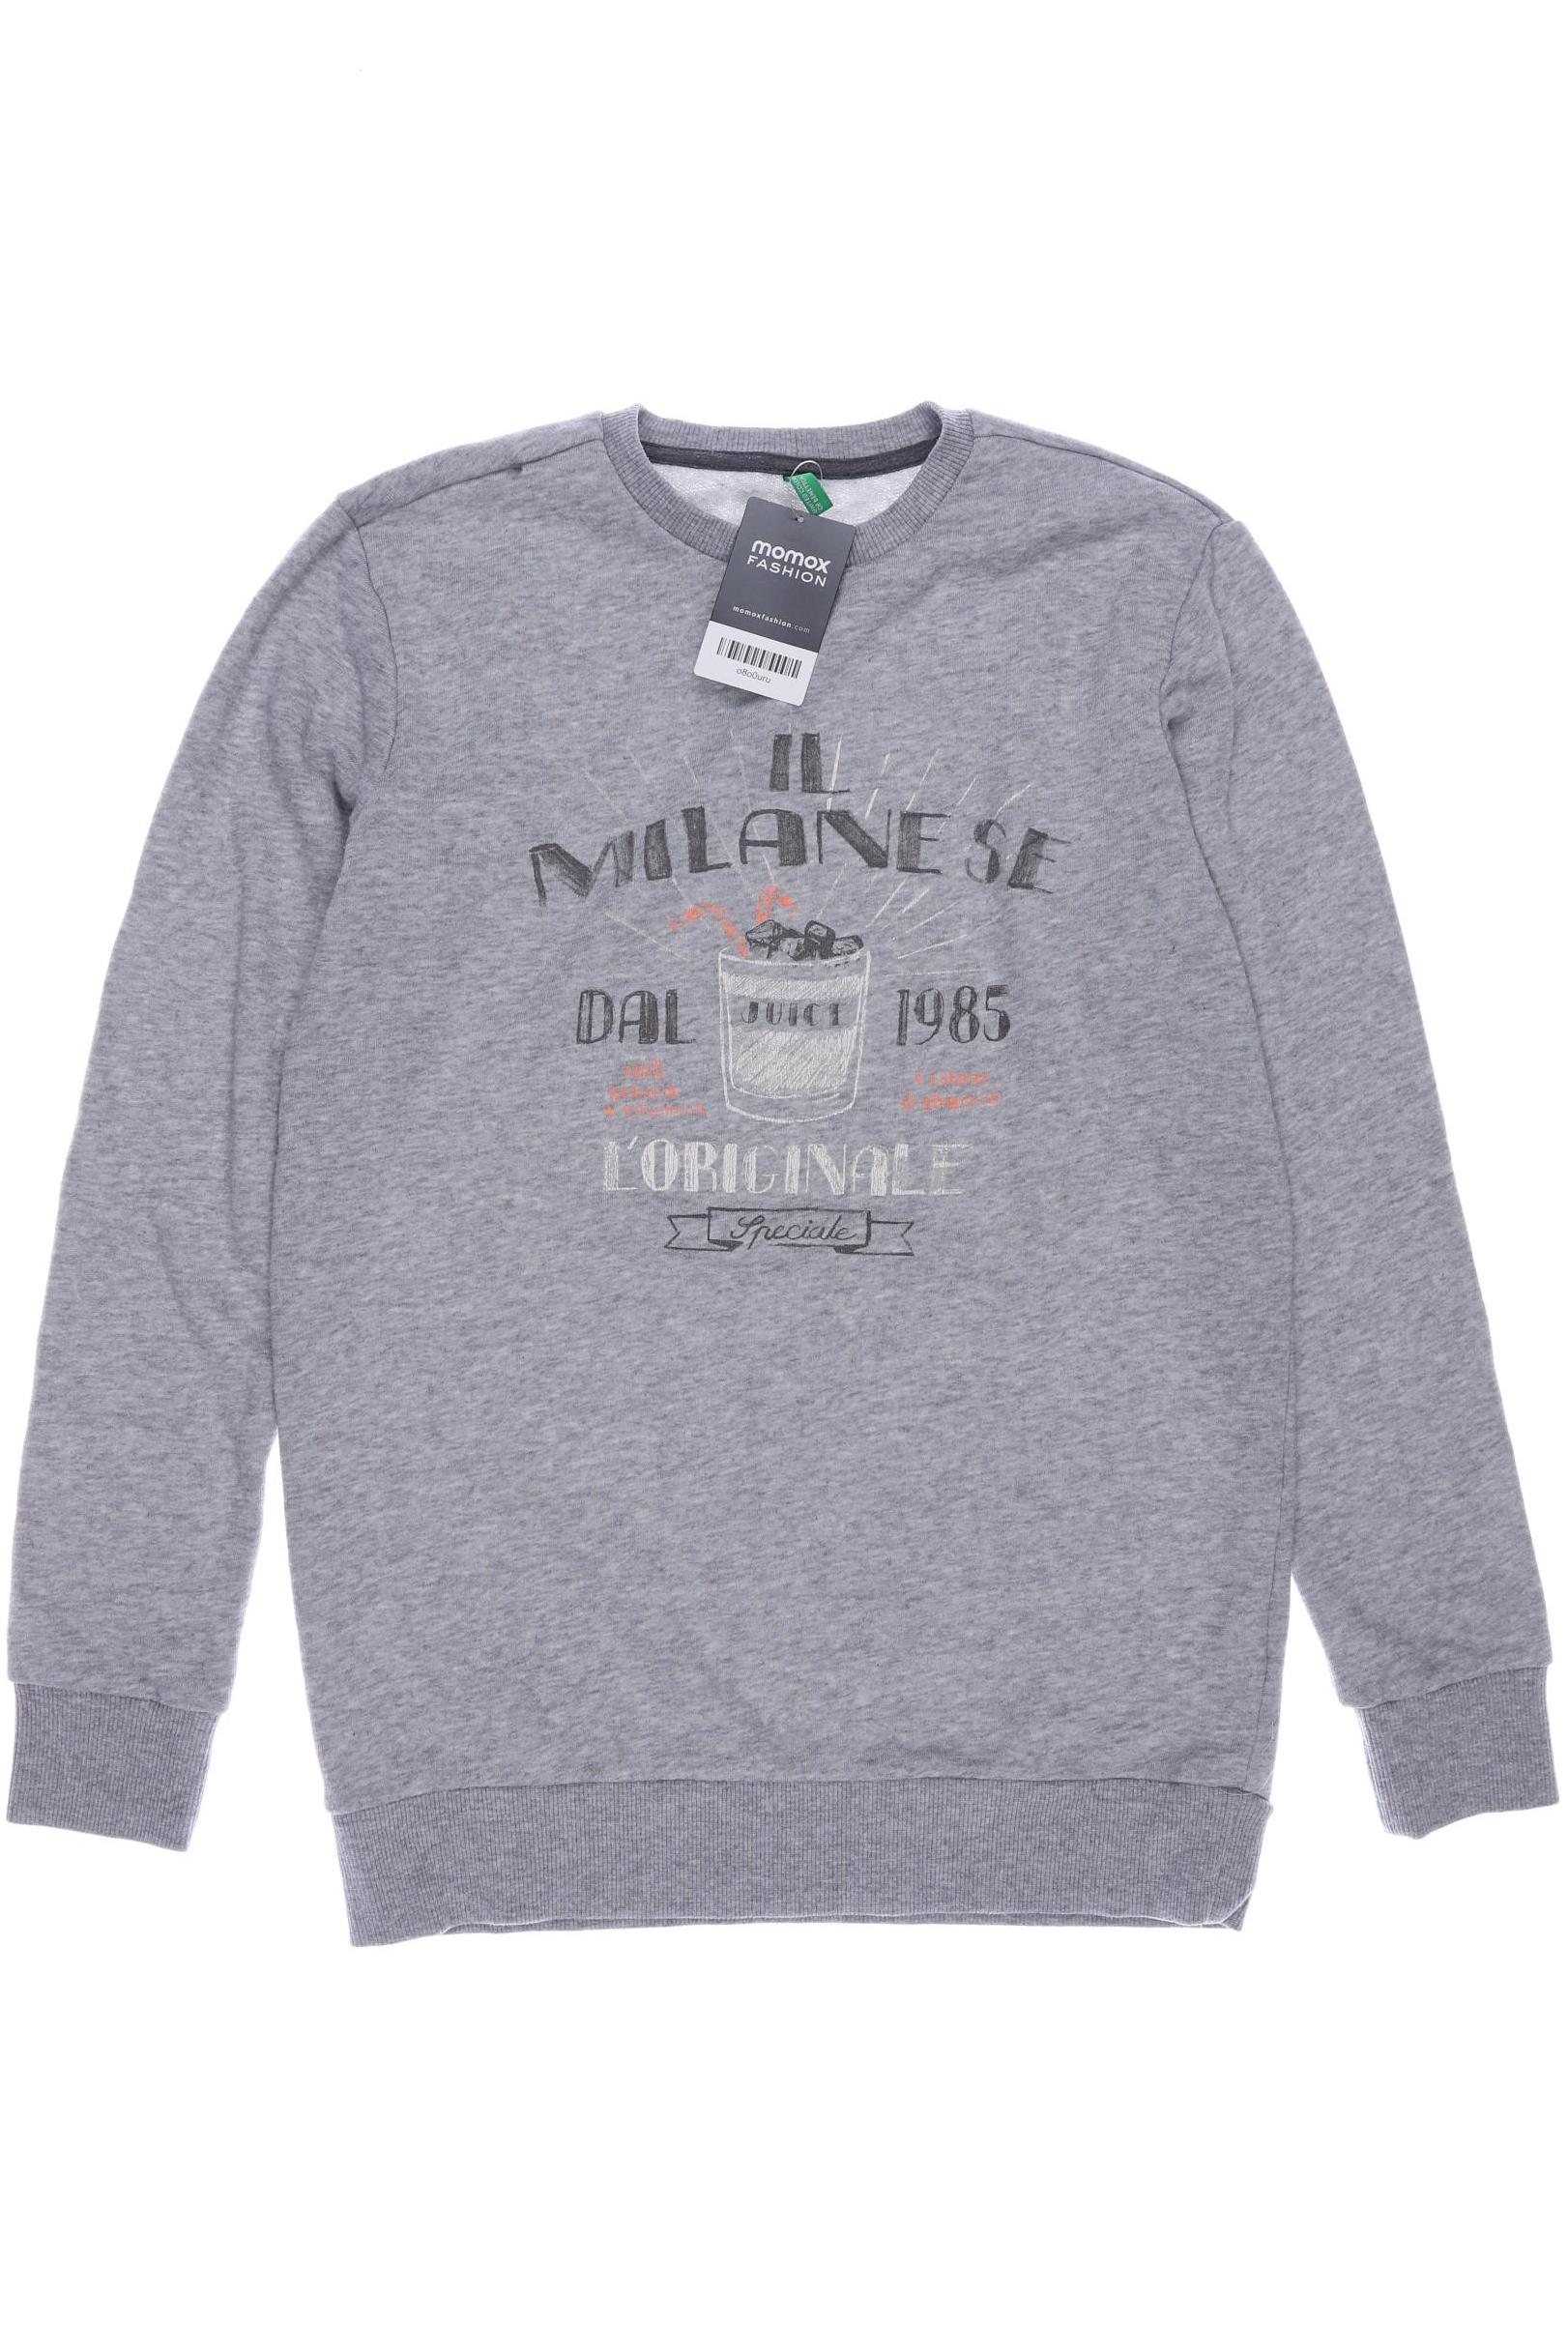 UNITED COLORS OF BENETTON Jungen Pullover, grau von United Colors of Benetton